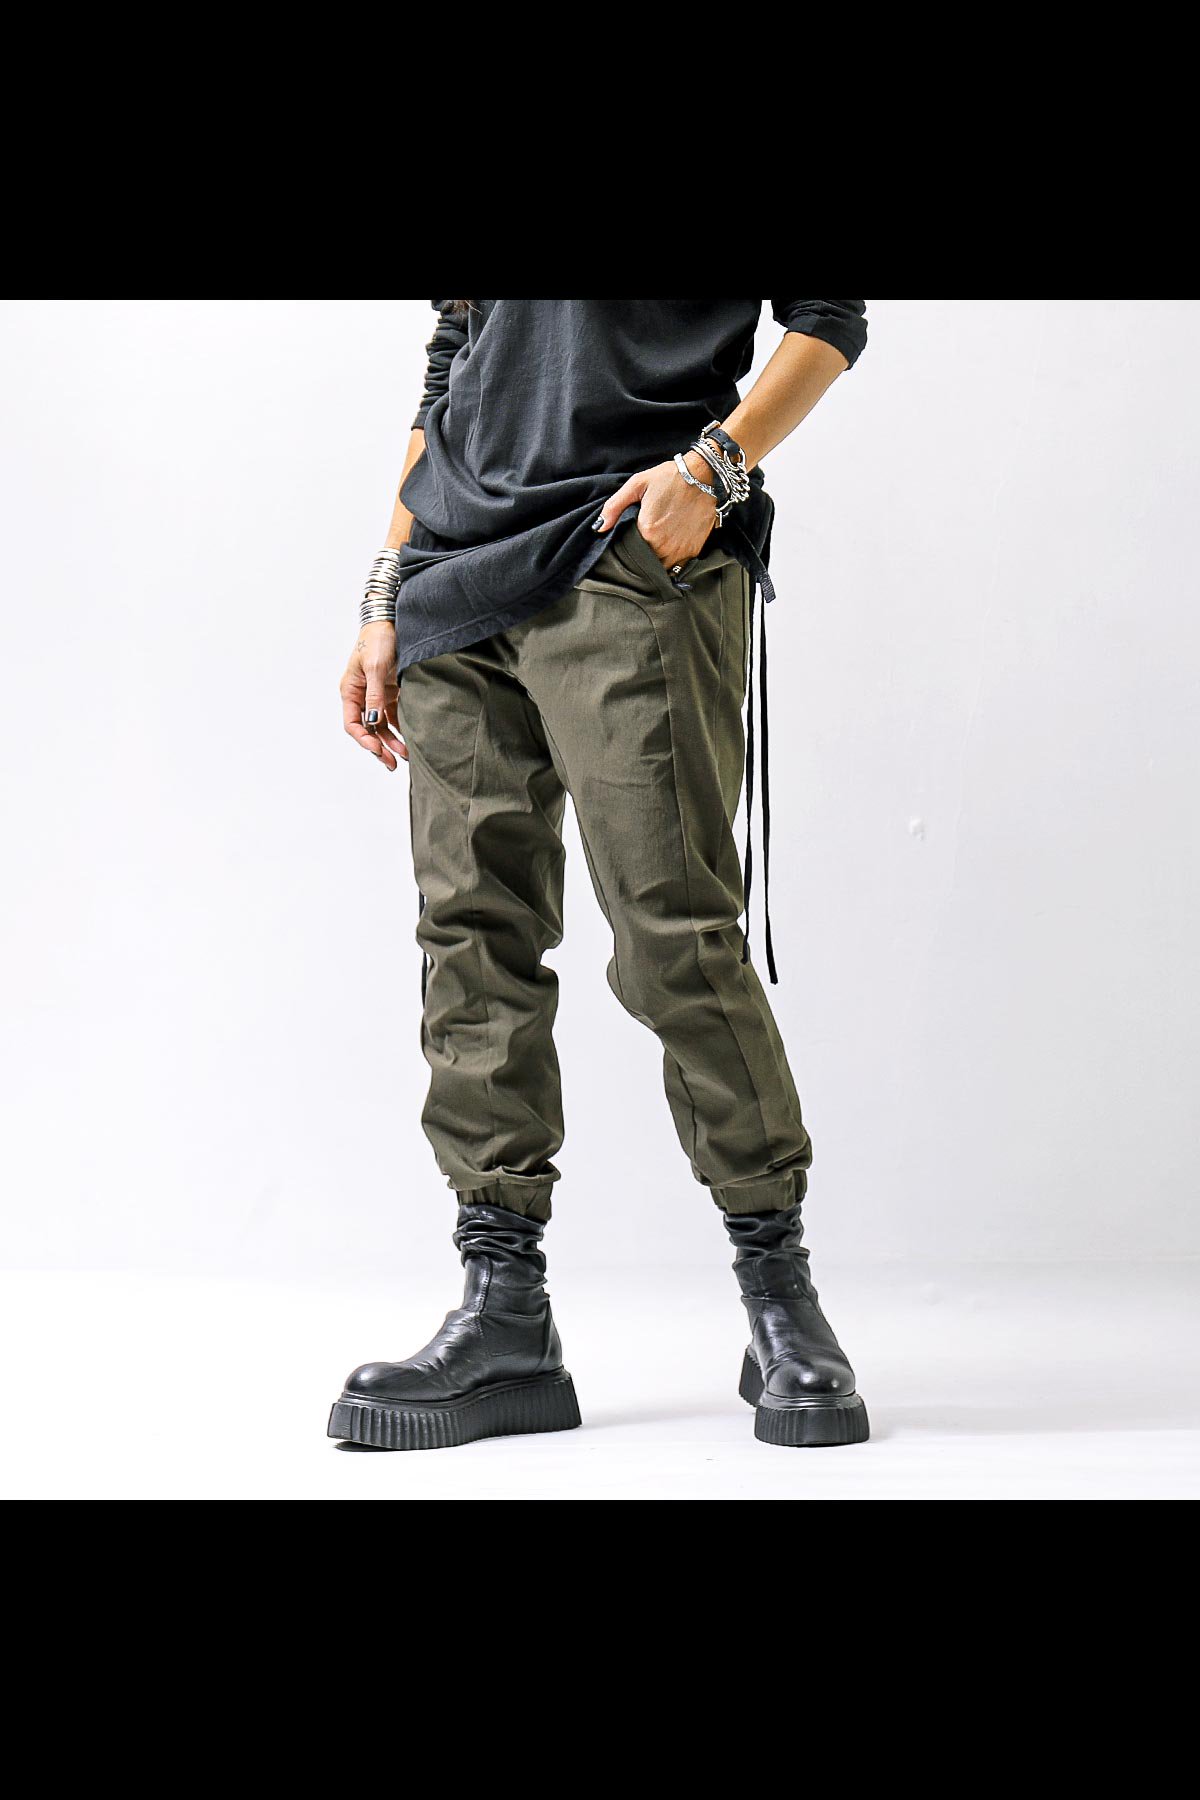 <img class='new_mark_img1' src='https://img.shop-pro.jp/img/new/icons8.gif' style='border:none;display:inline;margin:0px;padding:0px;width:auto;' />UNISEX STRETCH RIB PANTS MST402_HUNT GREEN